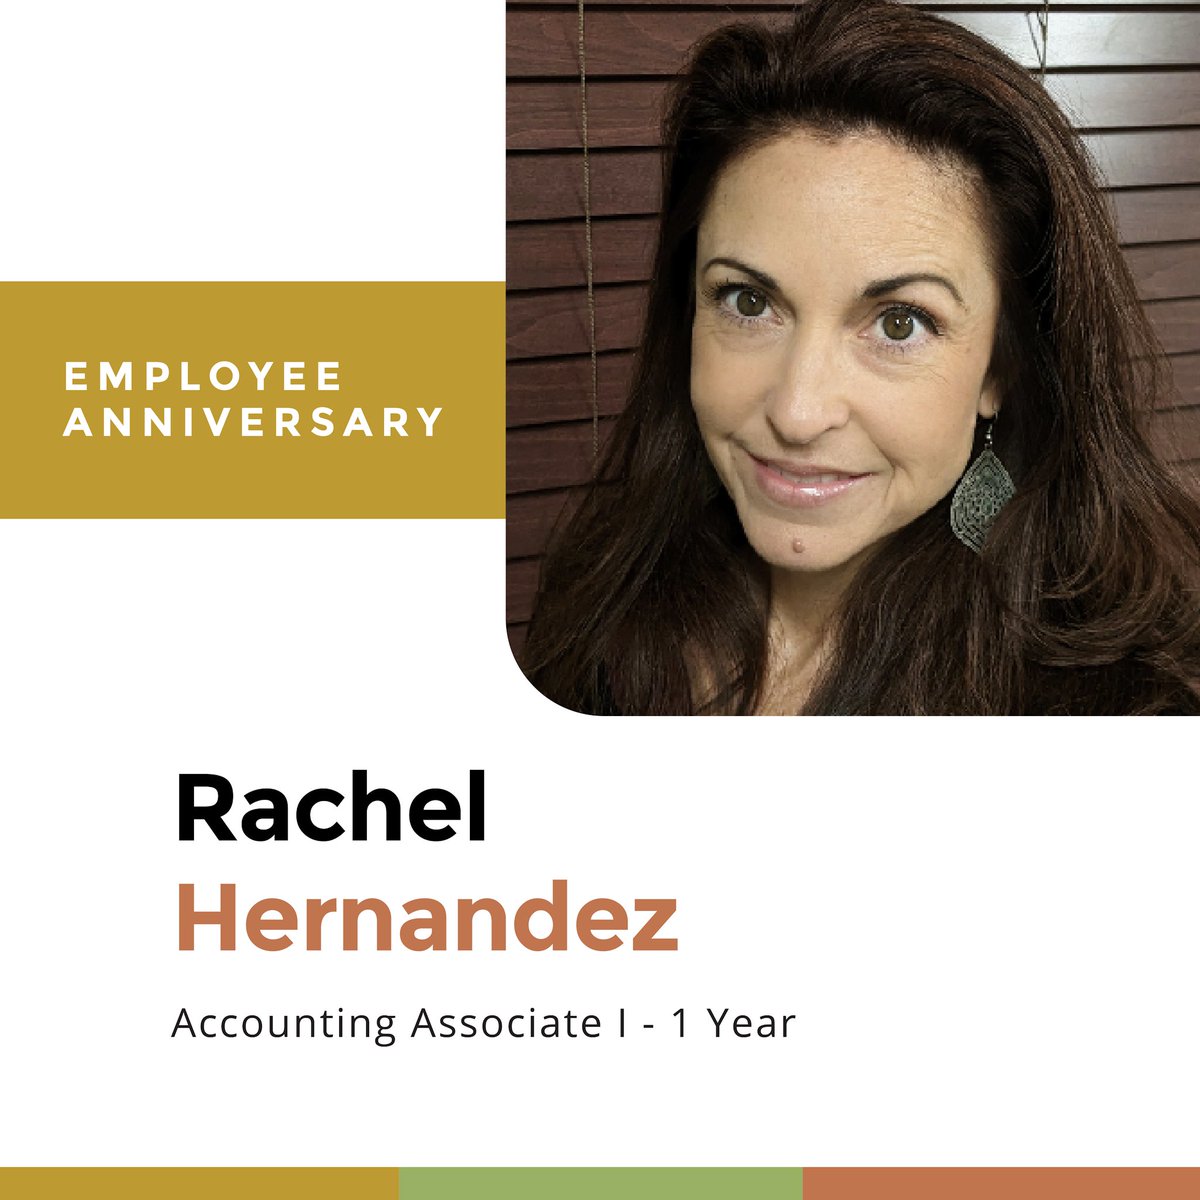 🎉Join us in celebrating Rachel Hernandez’s 1st year with the FLORES family! We’re thankful for your talent and dedication. Happy Workiversary!

#WorkAnniversary #TeamUpdates #FLORESFamily